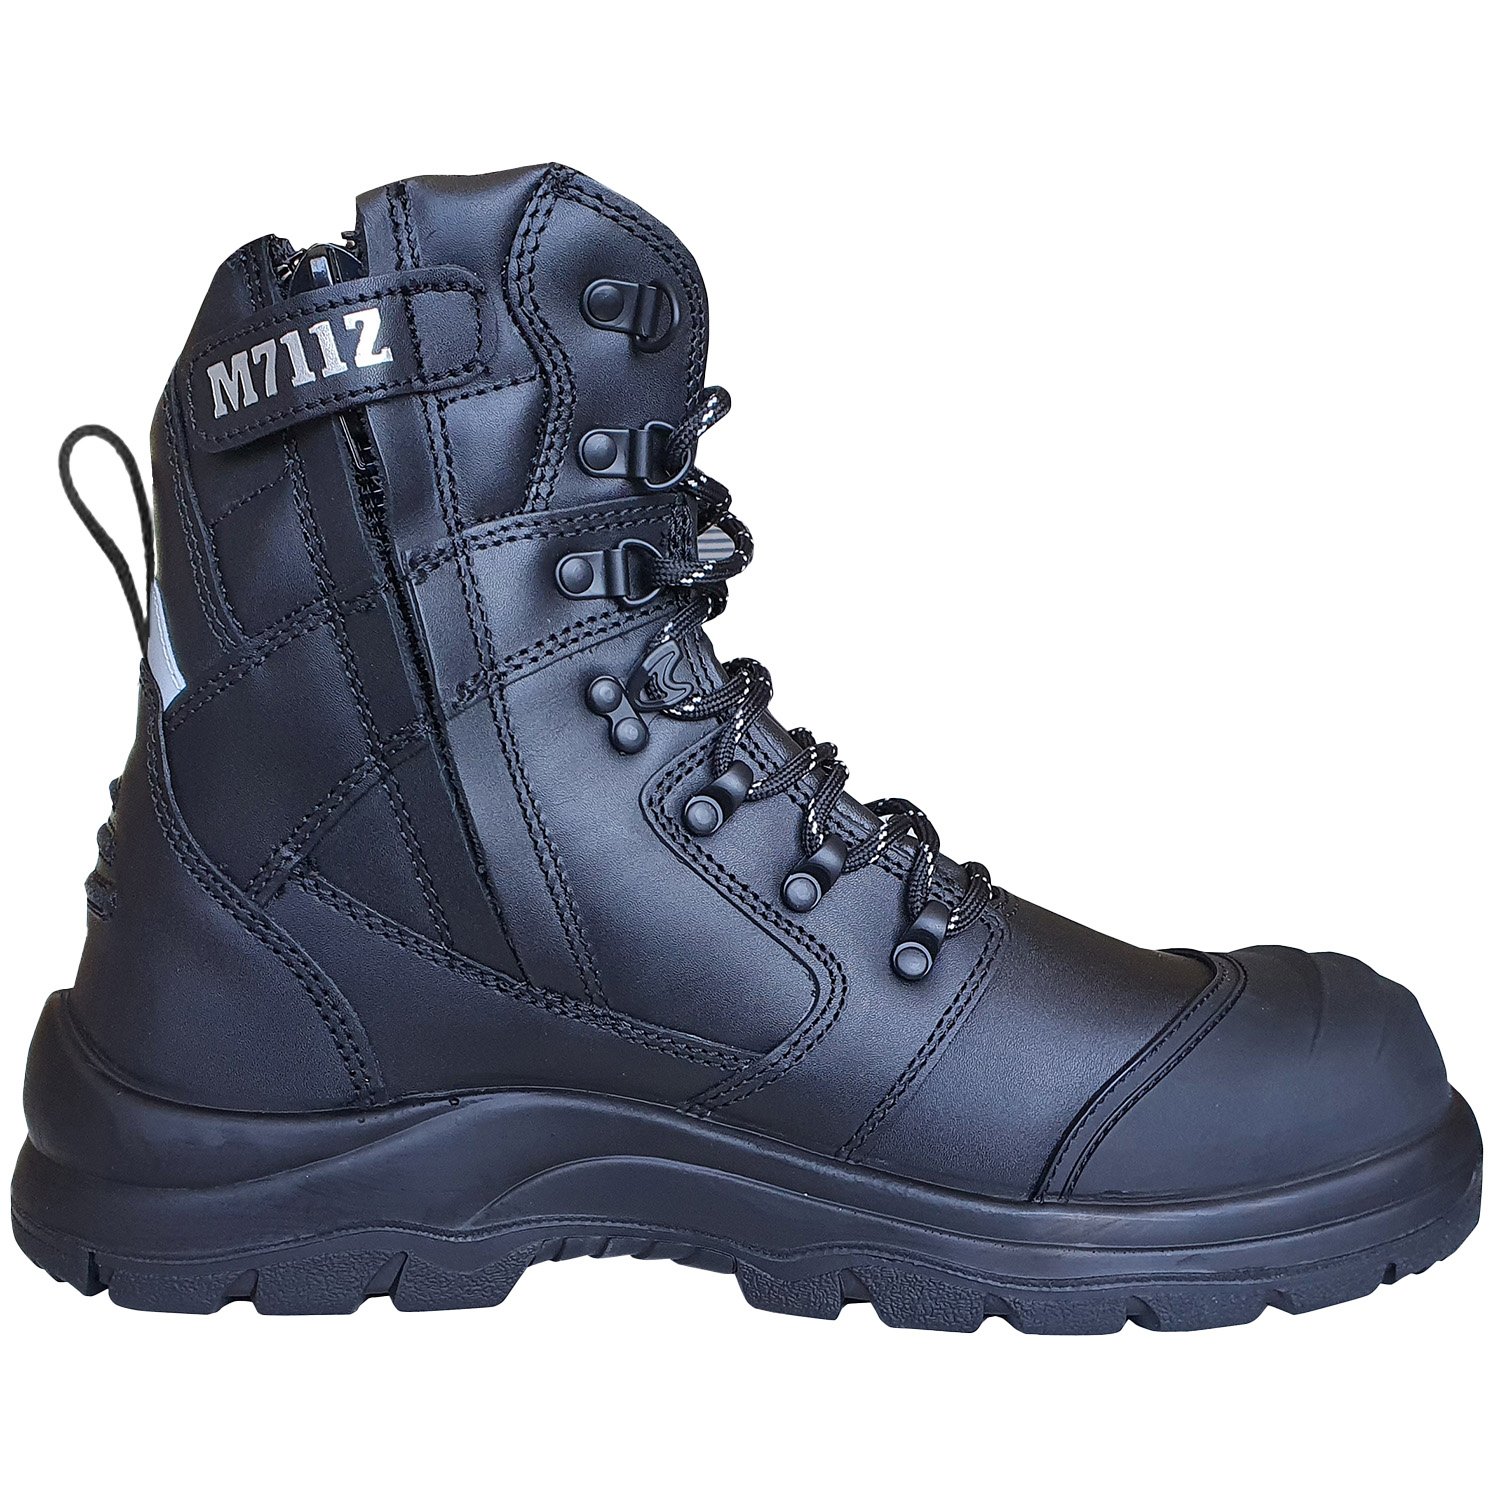 Mustang Wear 711Z Nitrile Sole 300°C Lace Up Zip Safety Boot with Scuff Cap